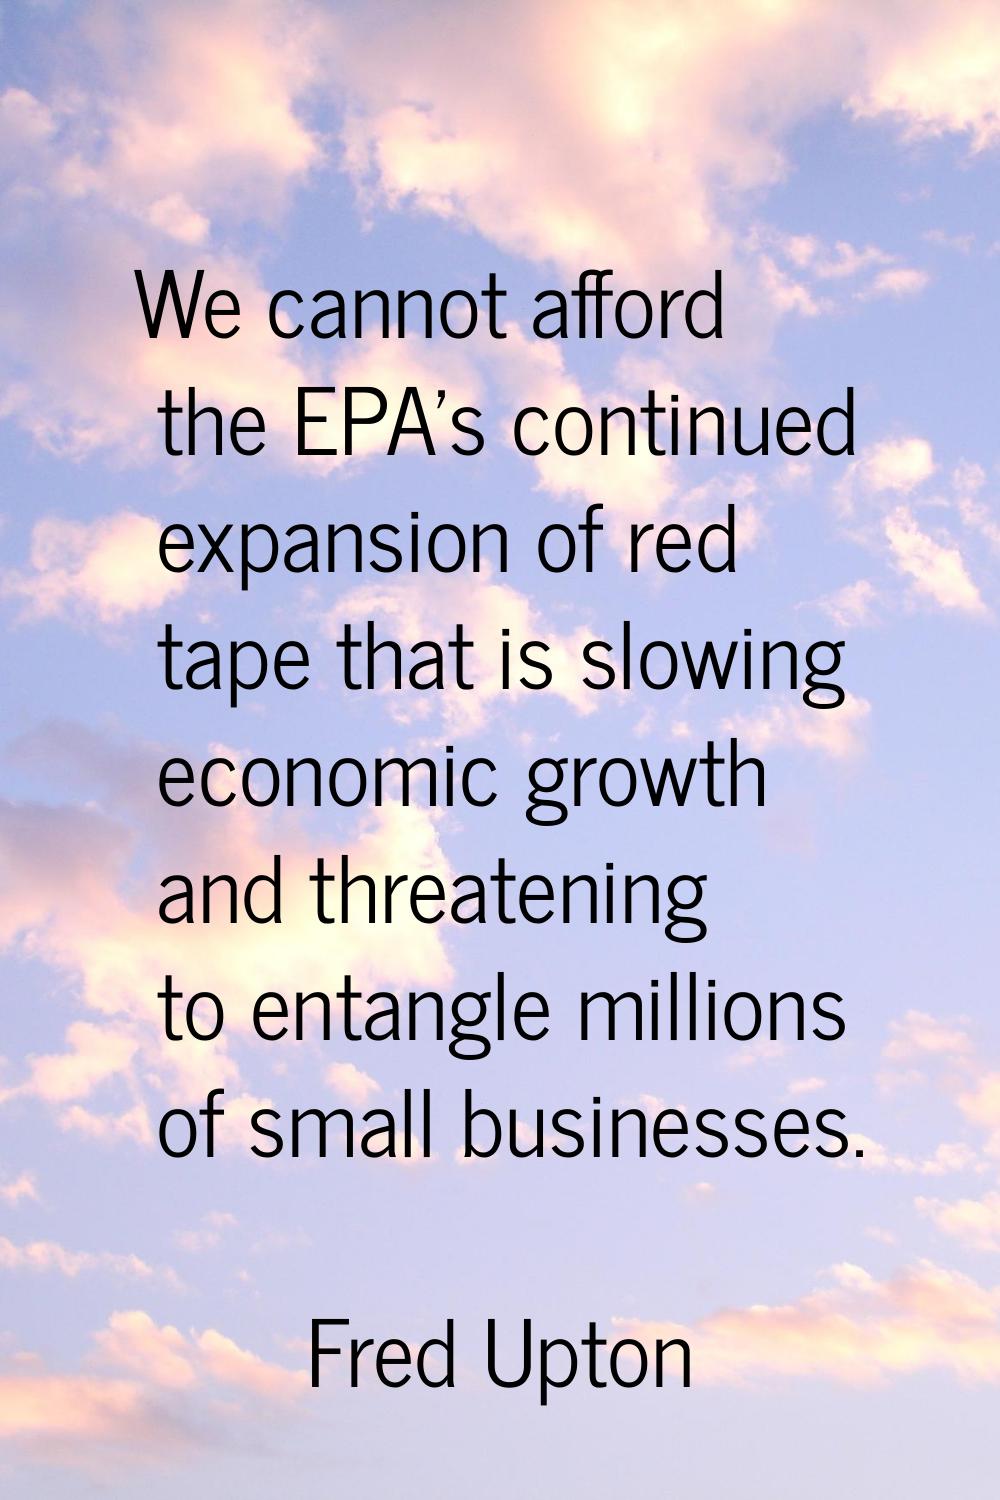 We cannot afford the EPA's continued expansion of red tape that is slowing economic growth and thre